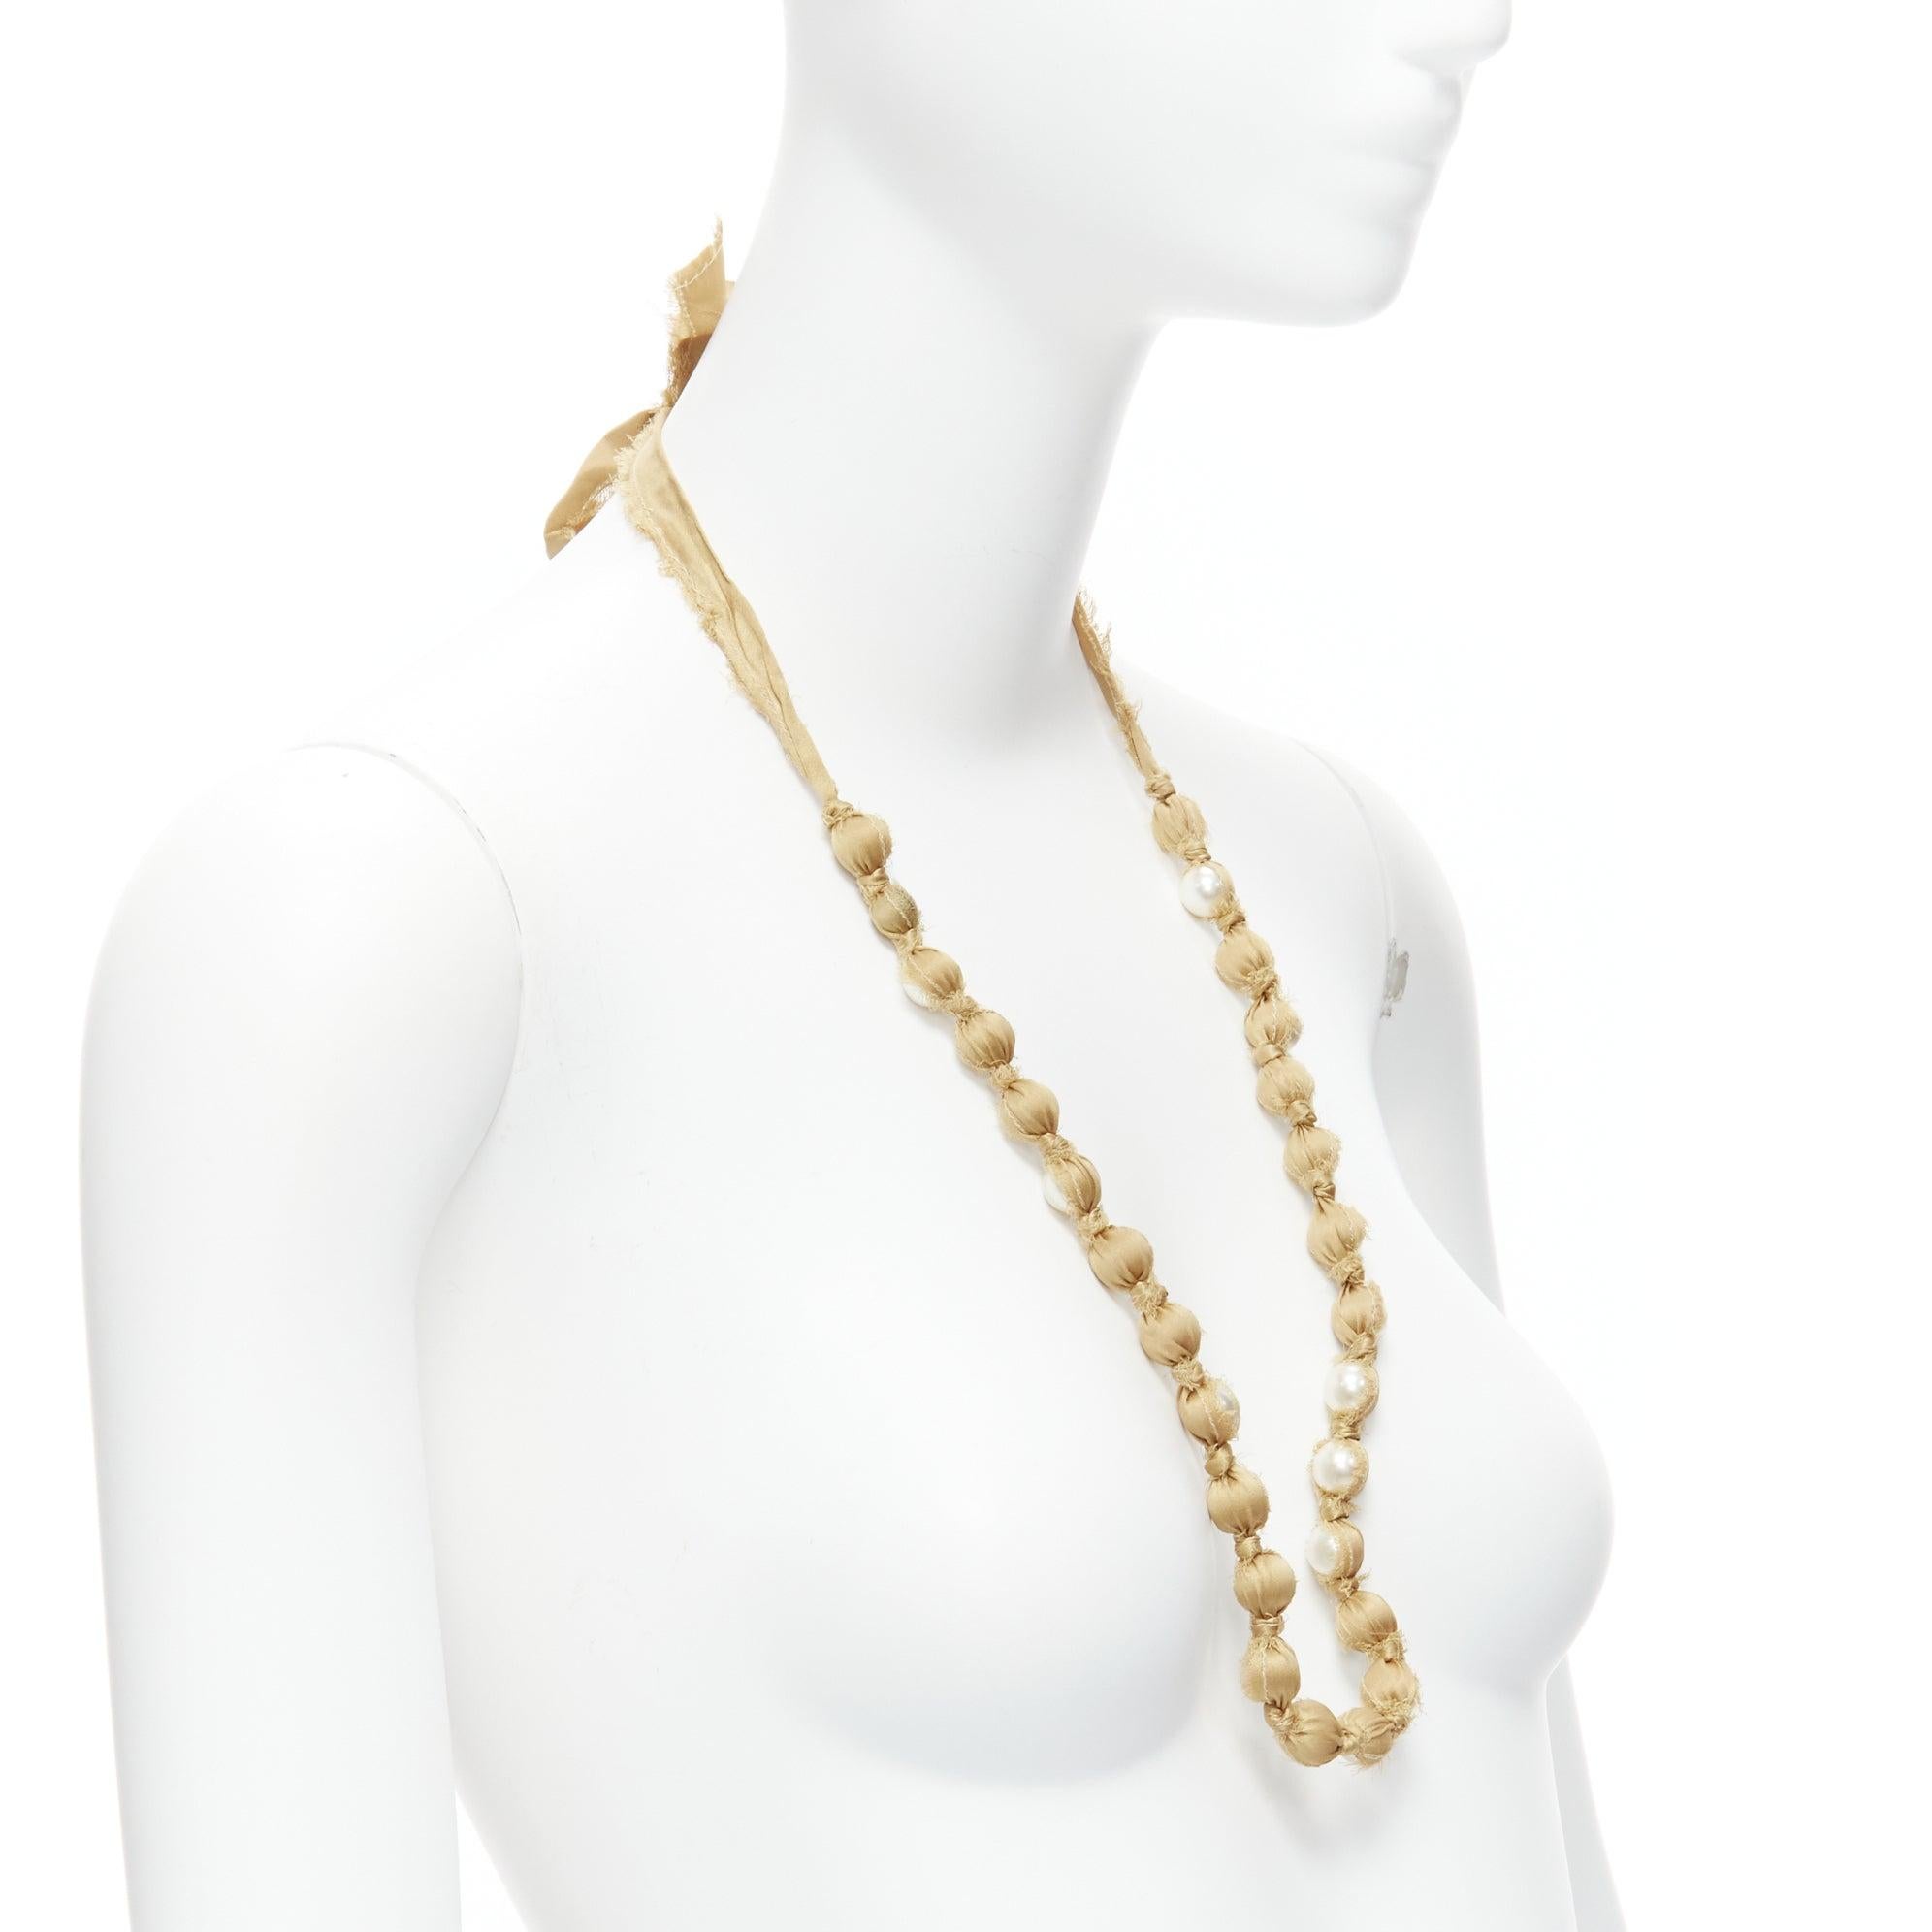 LANVIN ALBER ELBAZ gold silk ribbon cream pearl wrap long necklace In Excellent Condition For Sale In Hong Kong, NT